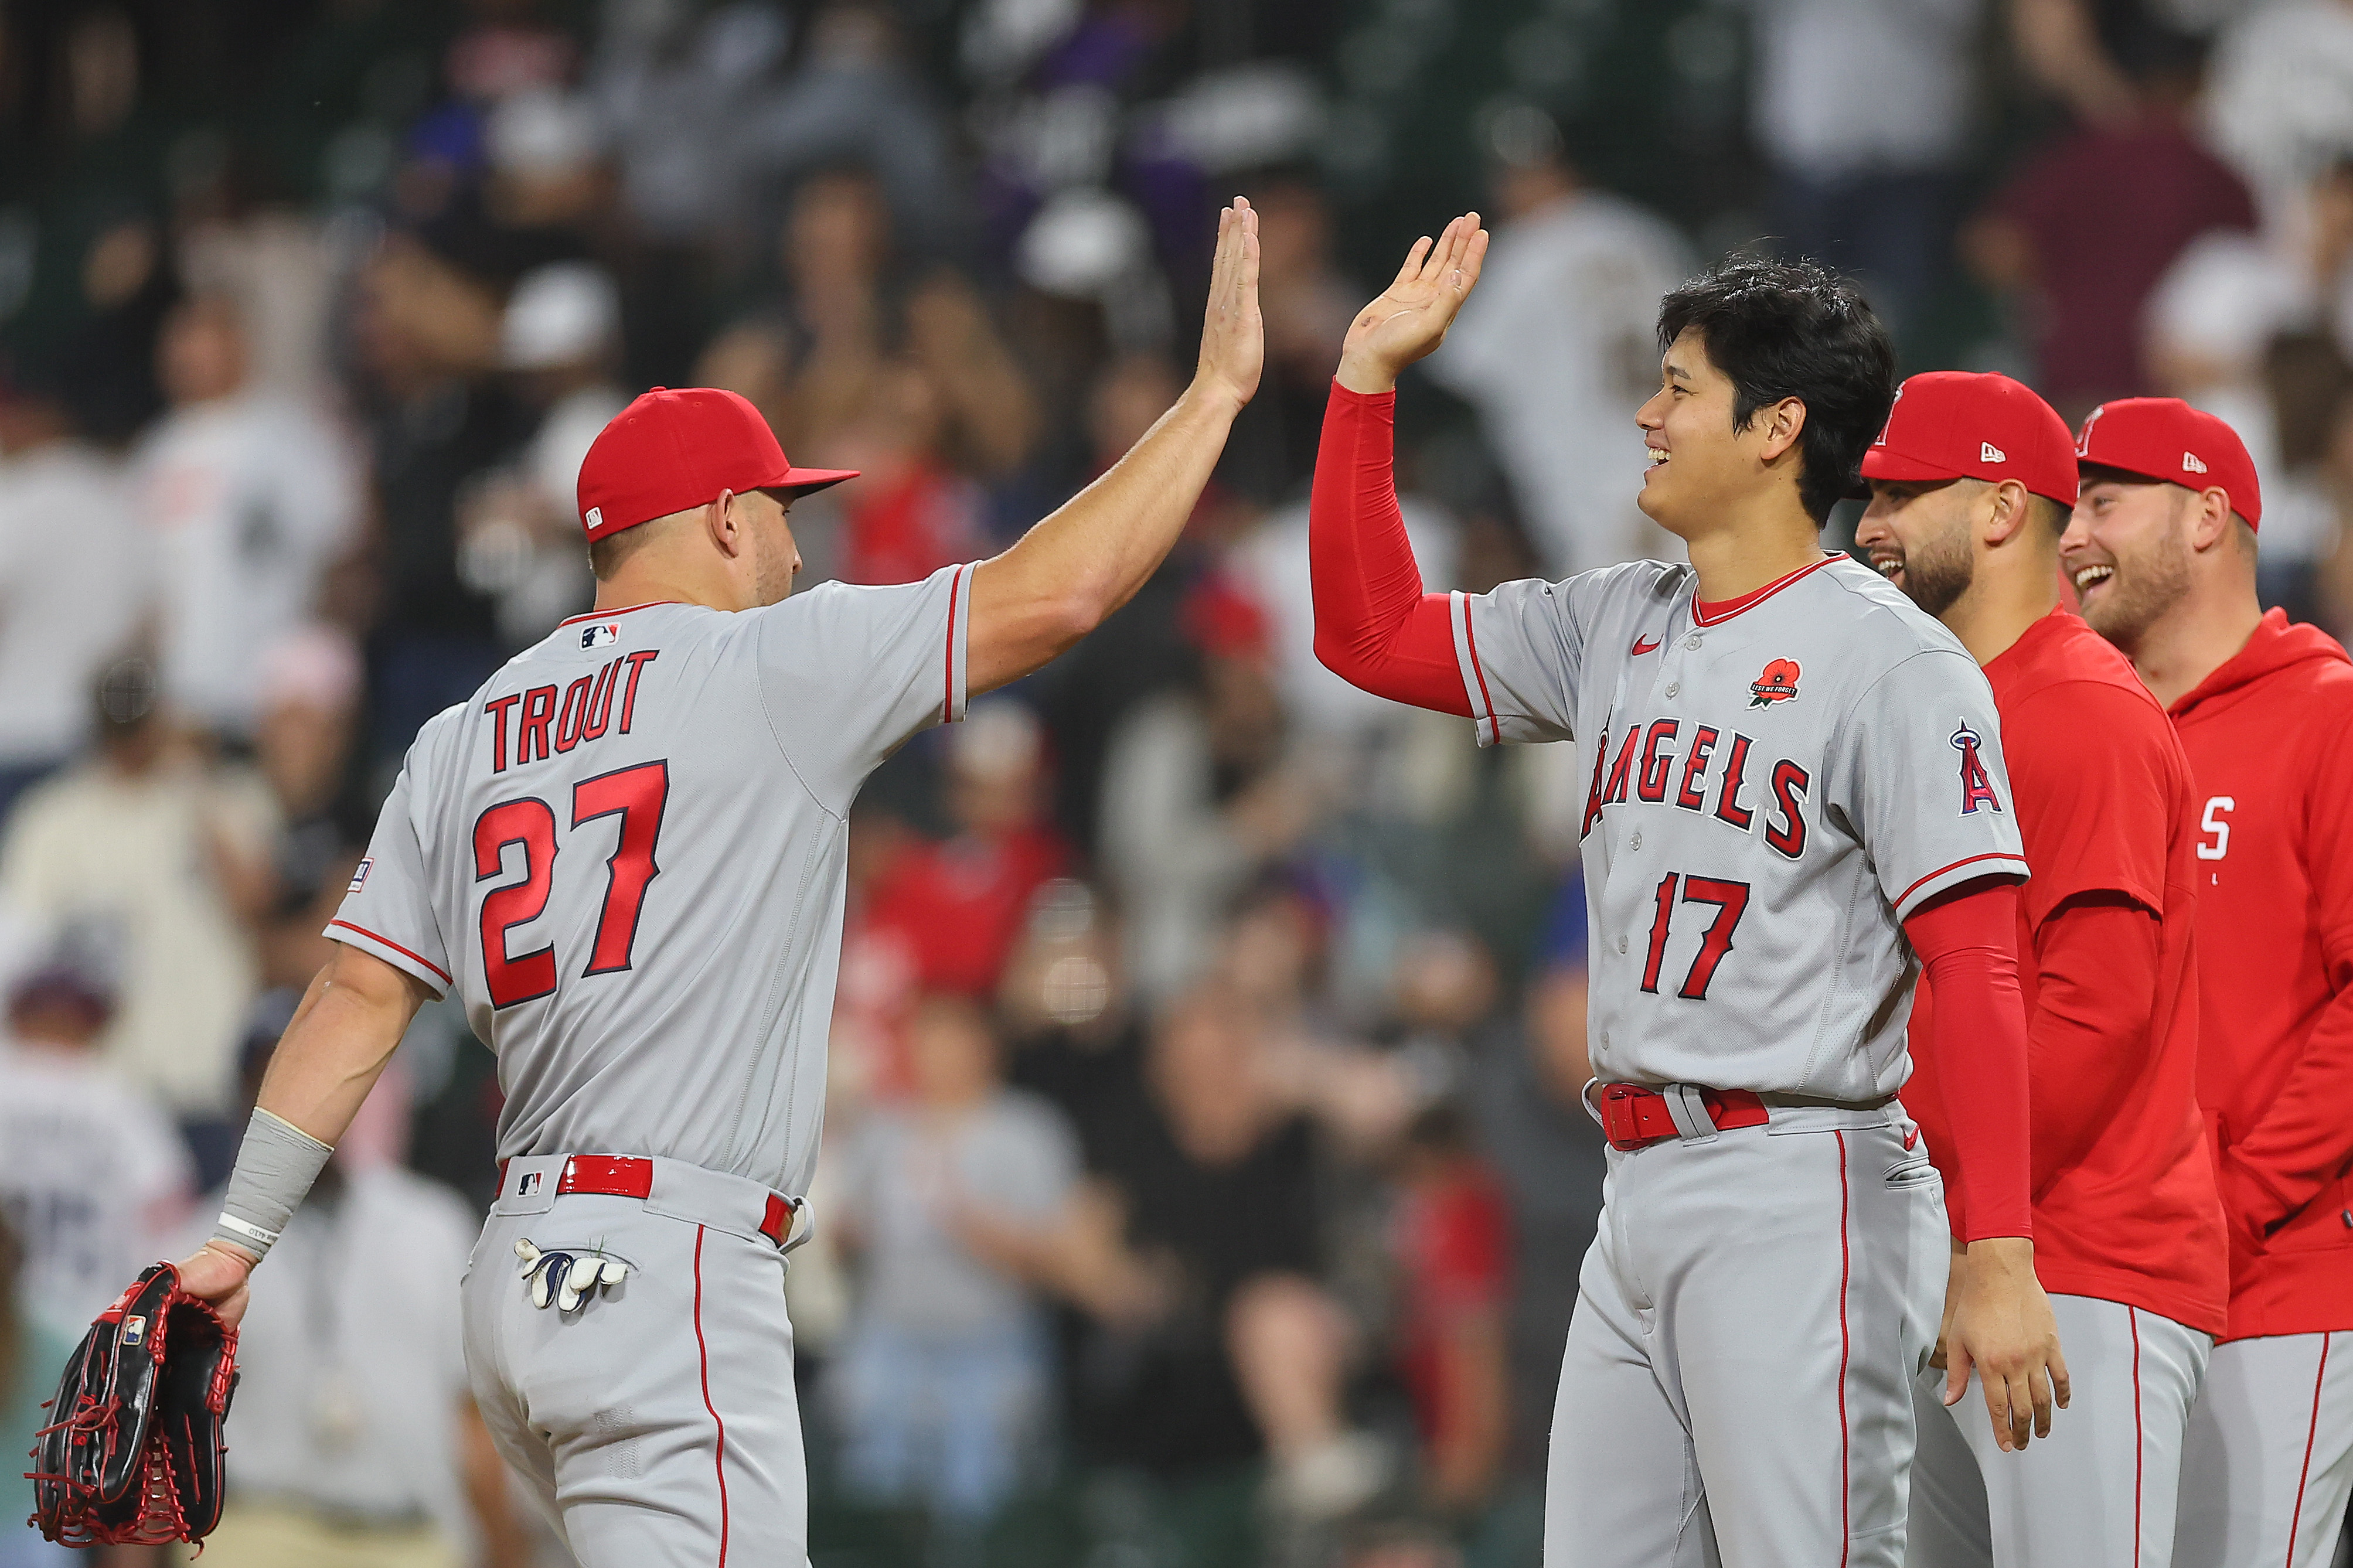 CHICAGO, ILLINOIS - MAY 29: Mike Trout #27 and Shohei Ohtani #17 of the Los Angeles Angels high five after defeating the Chicago White Sox at Guaranteed Rate Field on May 29, 2023 in Chicago, Illinois. (Photo by Michael Reaves/Getty Images)